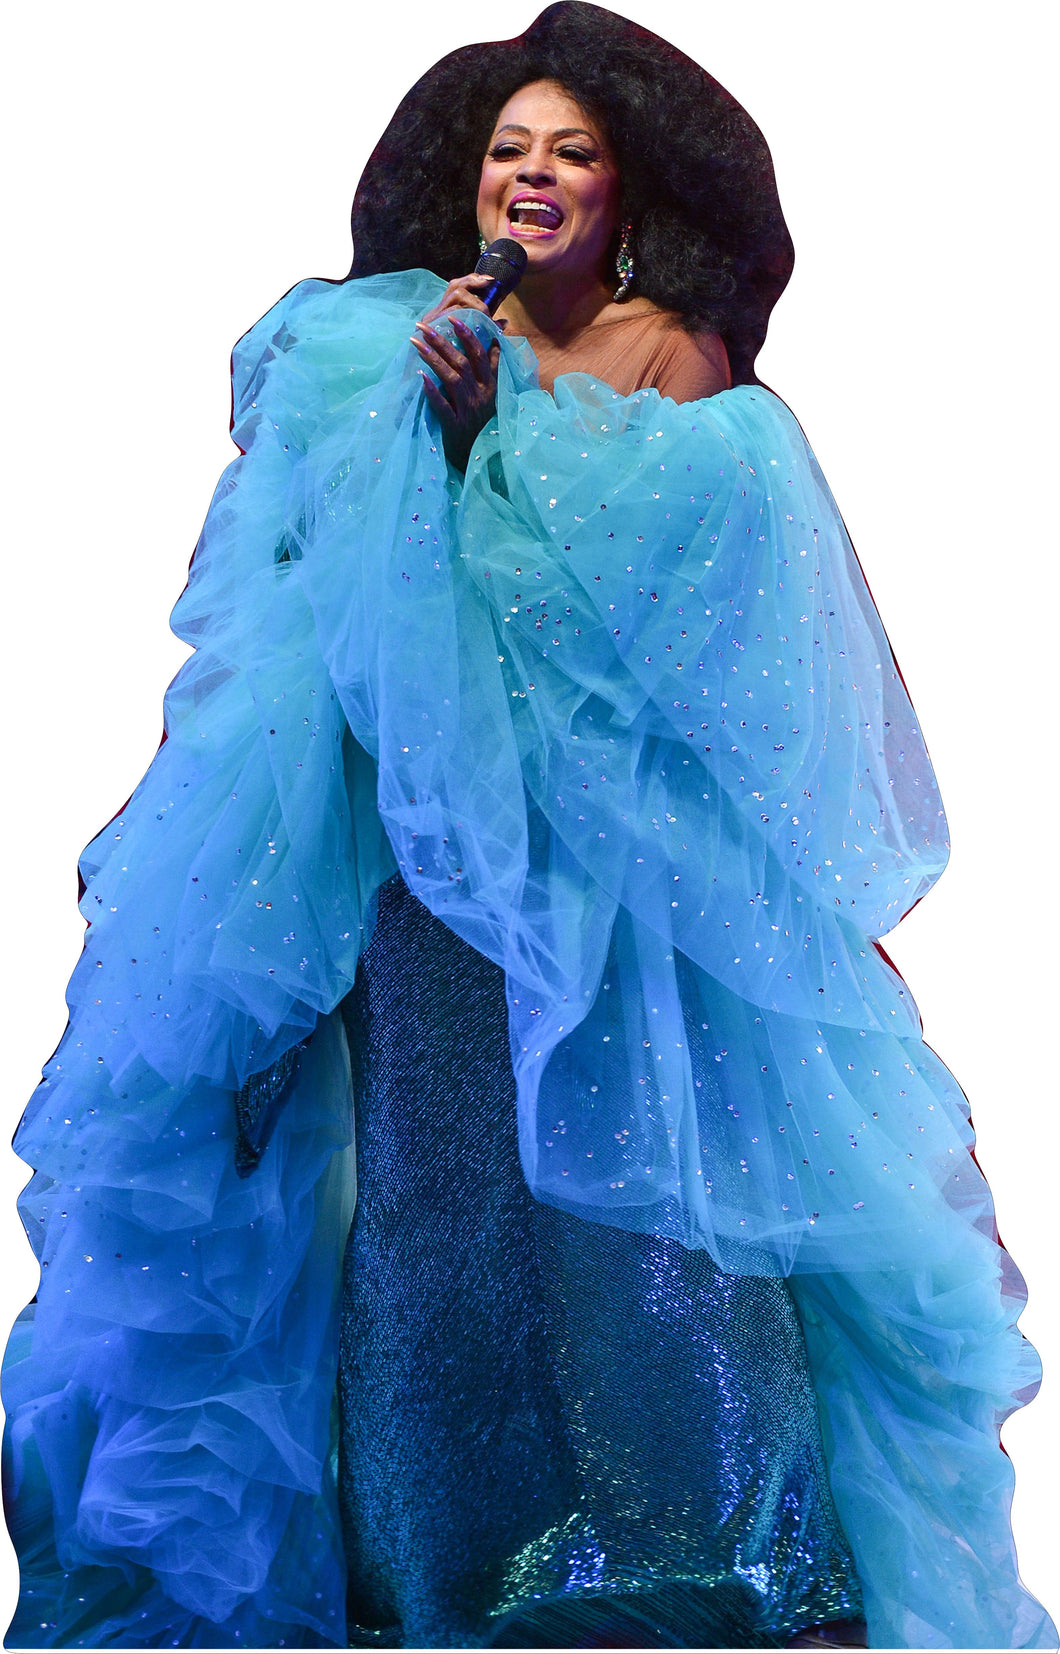 DIANA ROSS - TURQUOISE-BLUE  GOWN - TALL- 68